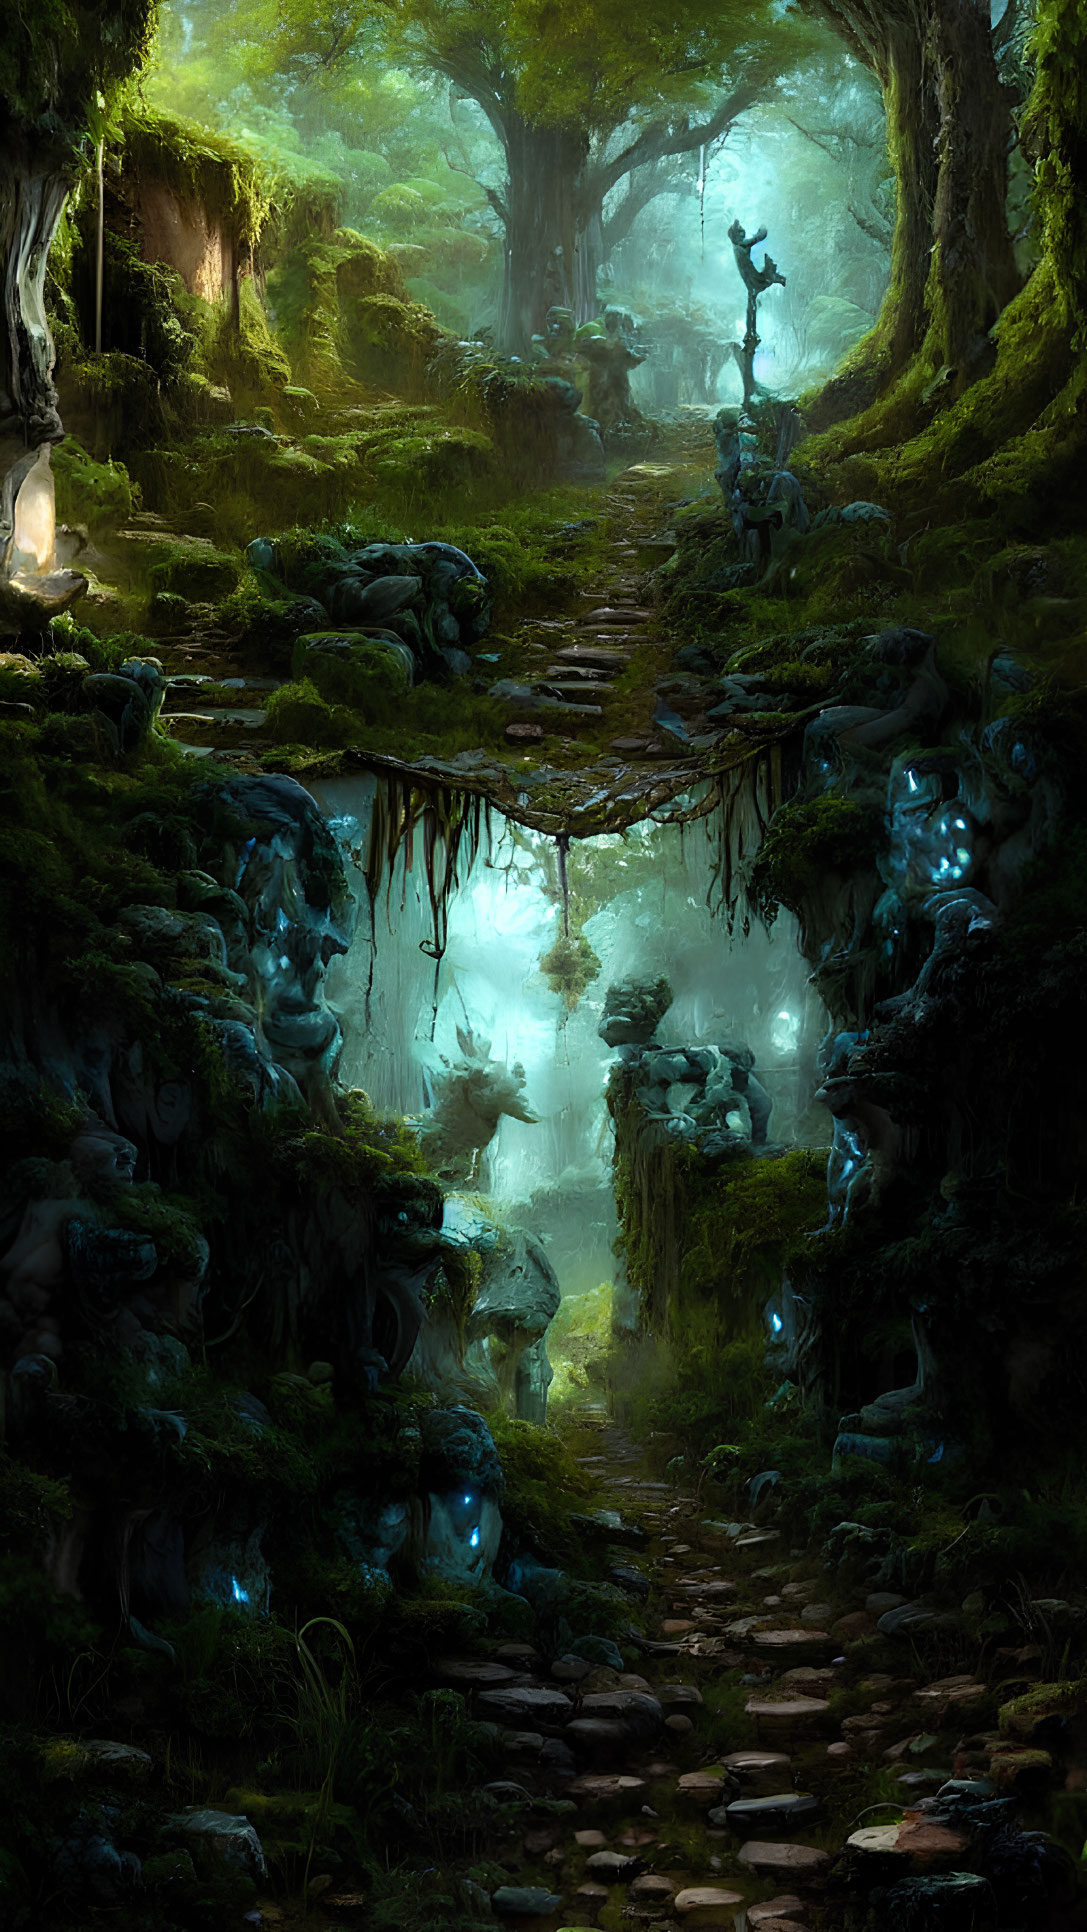 Enchanting forest scene with stone path, glowing blue lights, and mysterious figure.